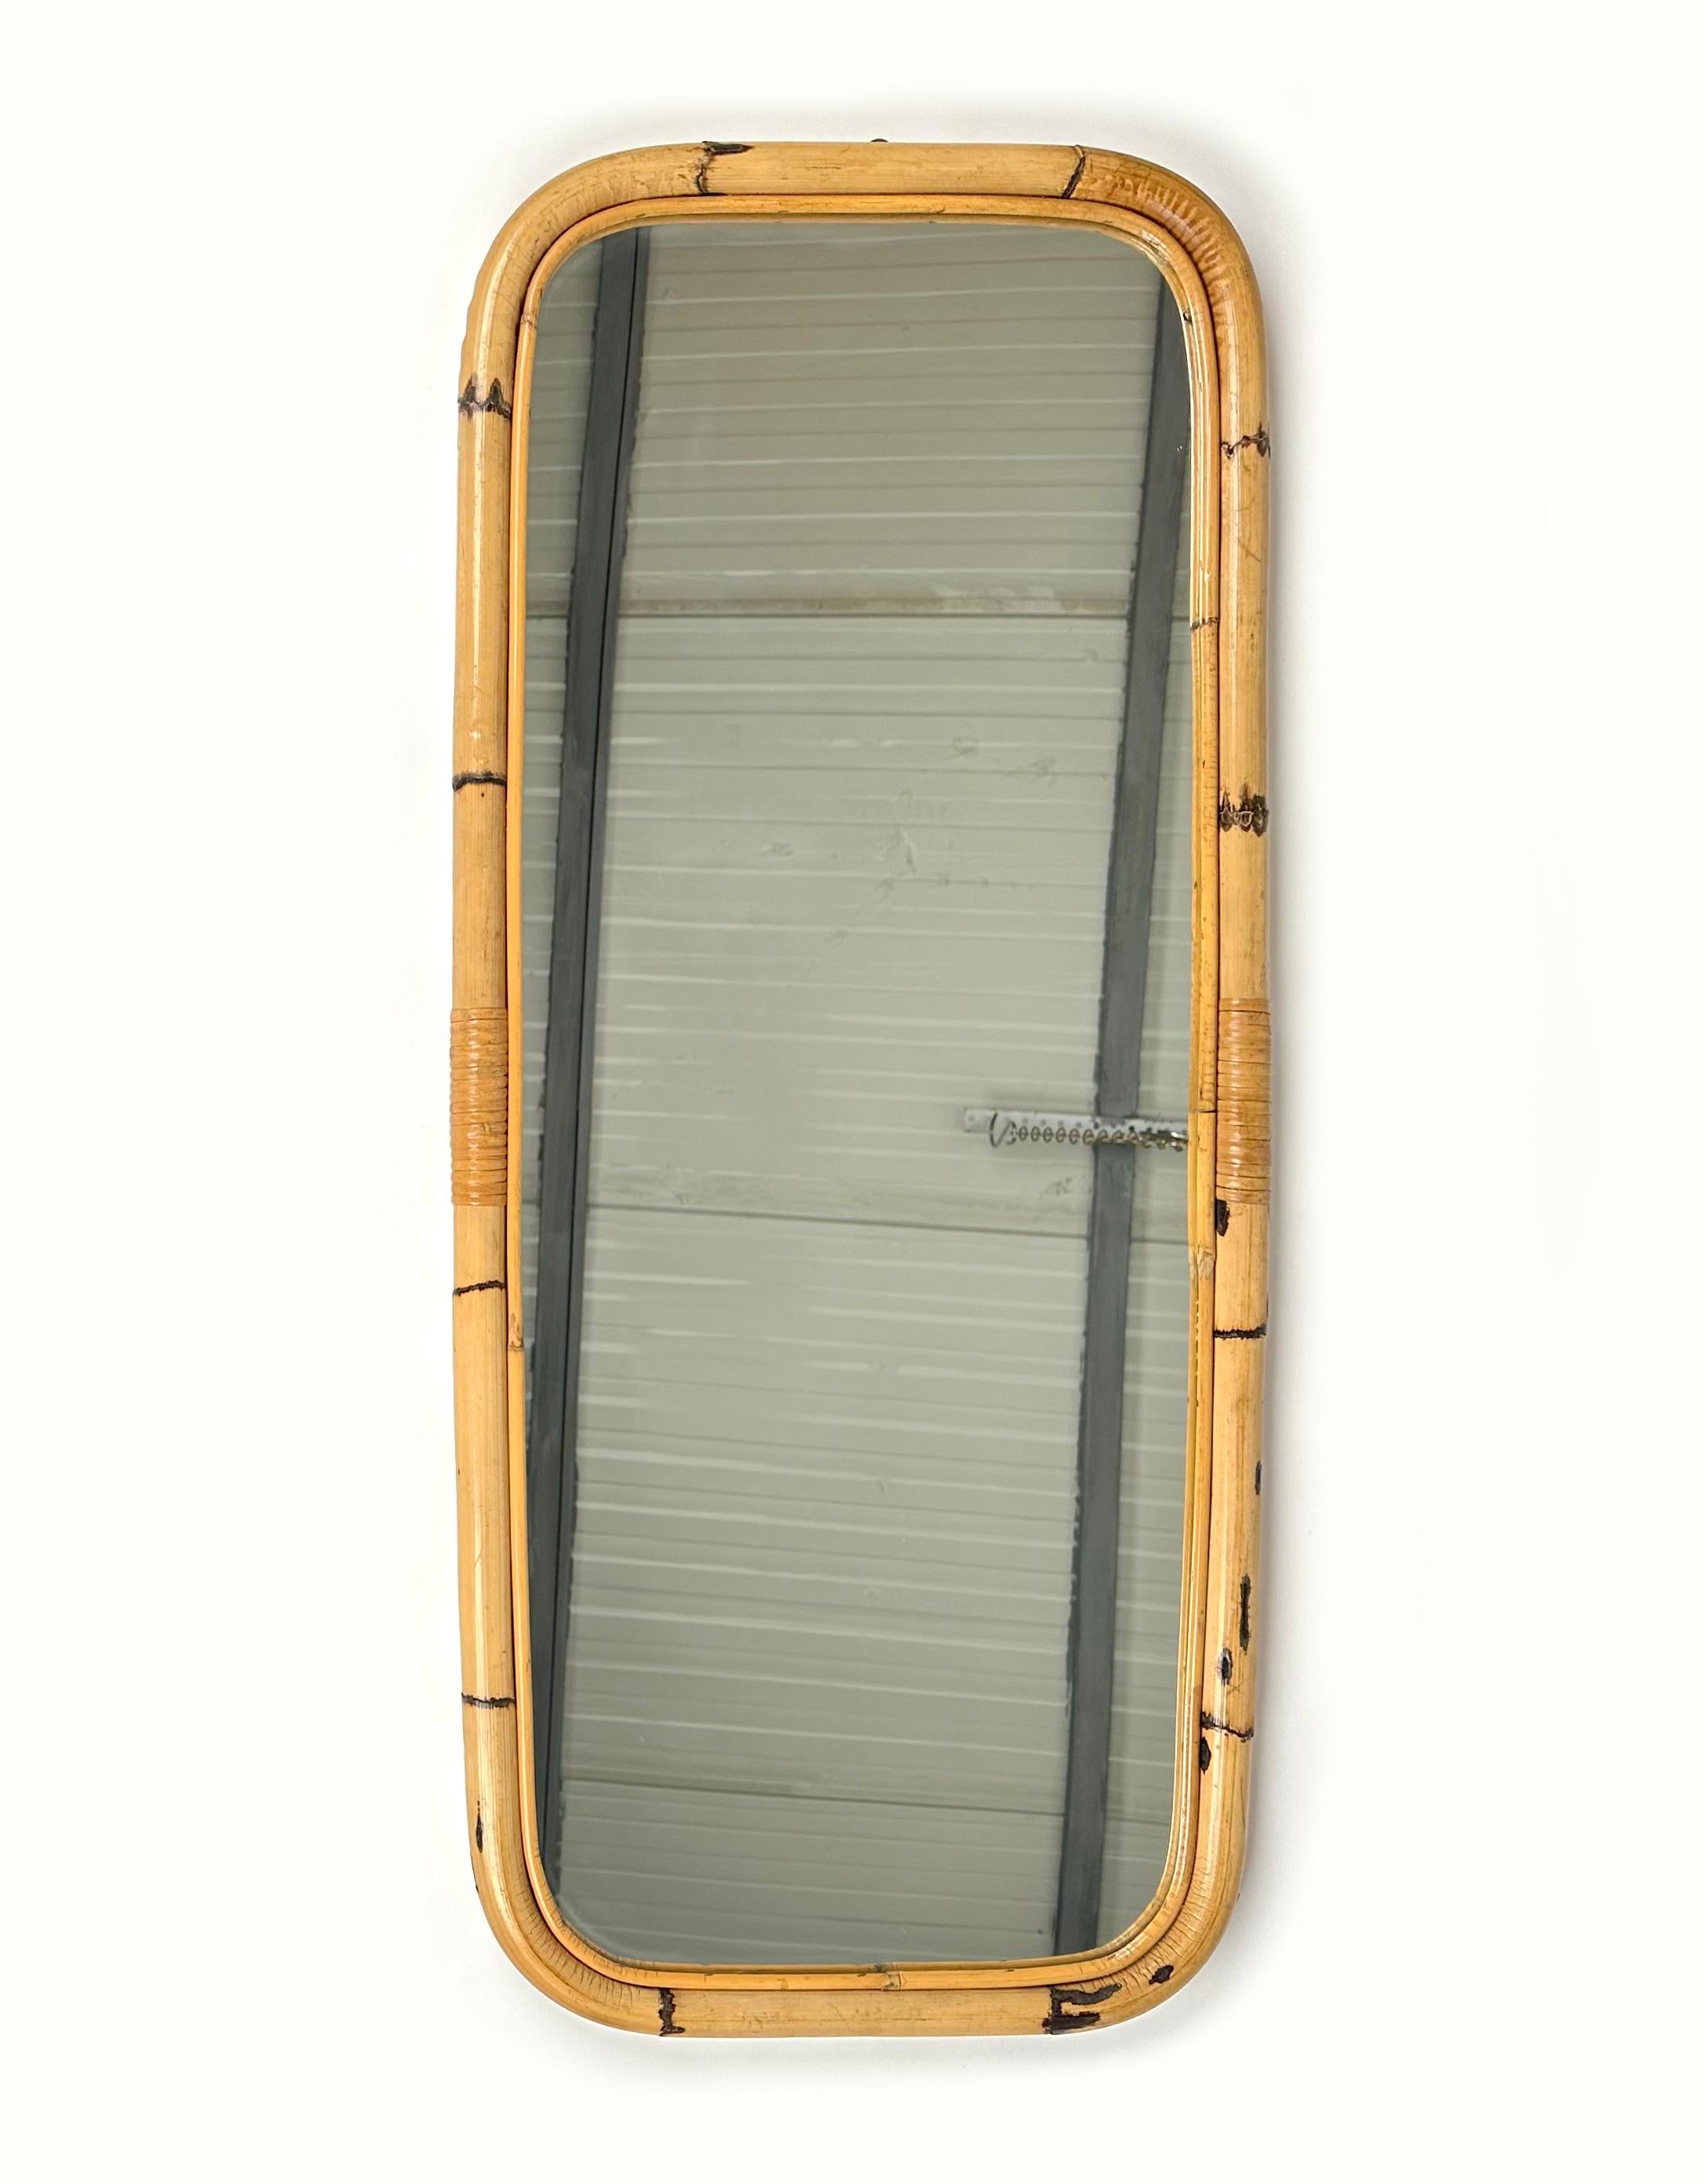 Italian Midcentury Bamboo and Rattan Rectangular Wall Mirror, Italy, 1960s For Sale